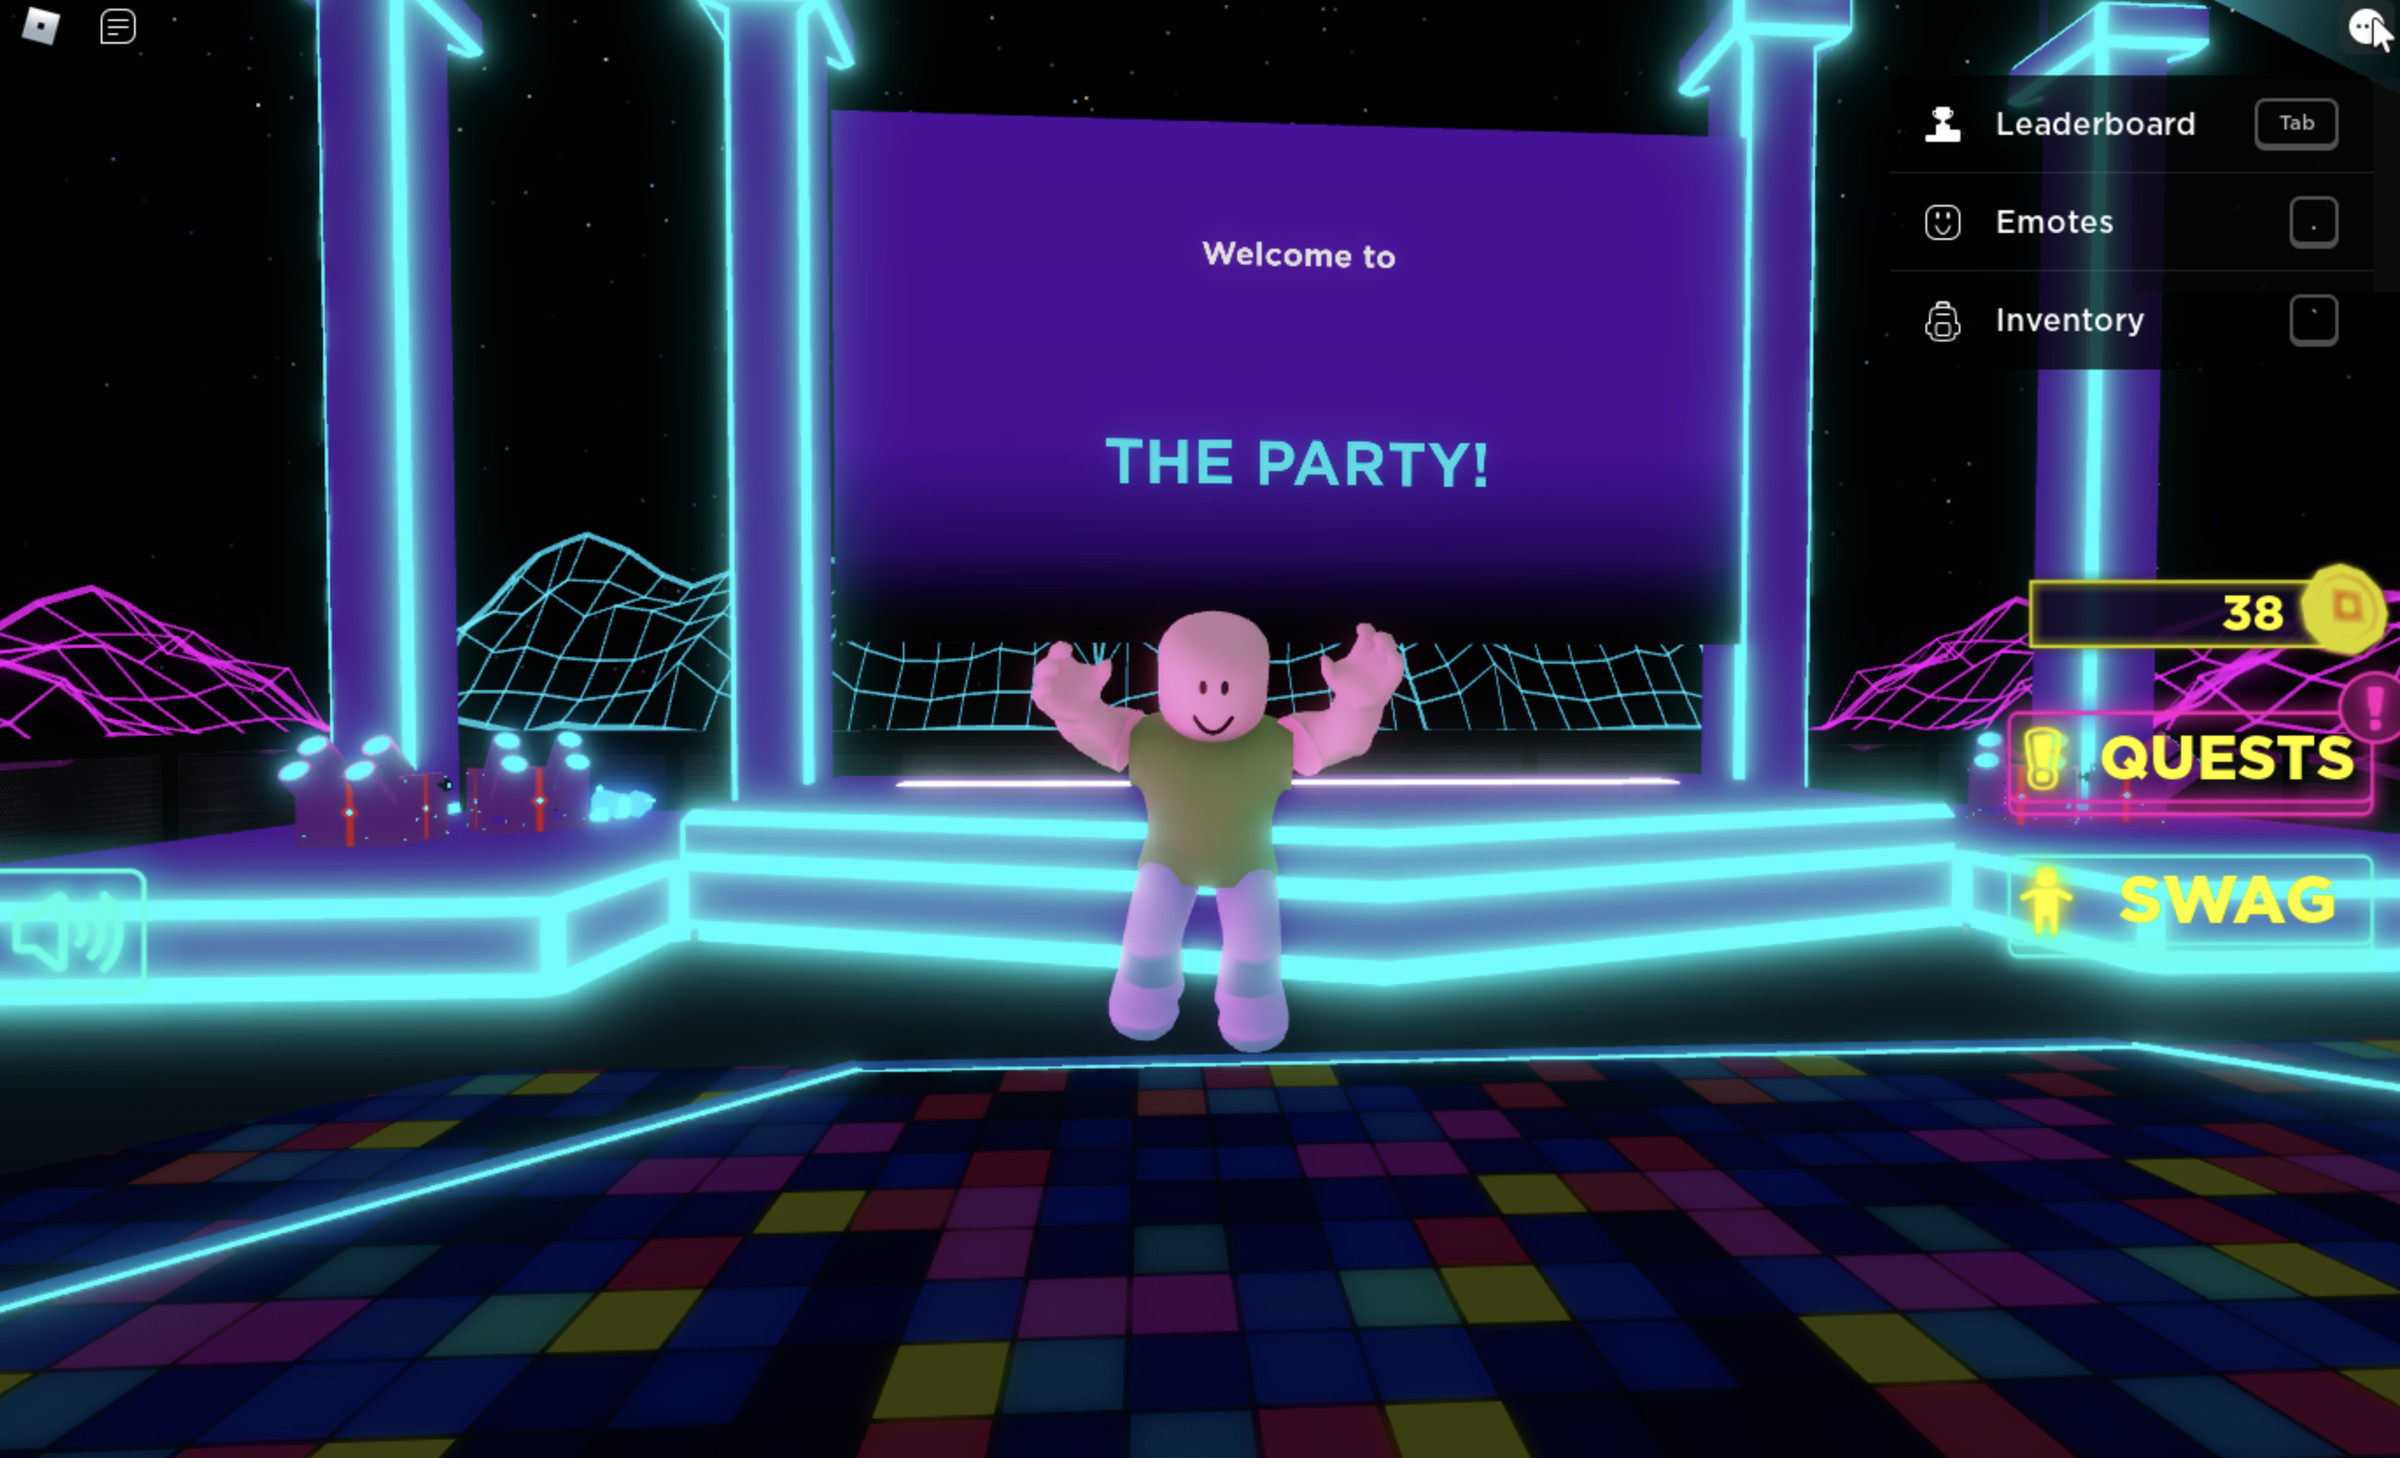 My Roblox avatar in a psychedelic party space.